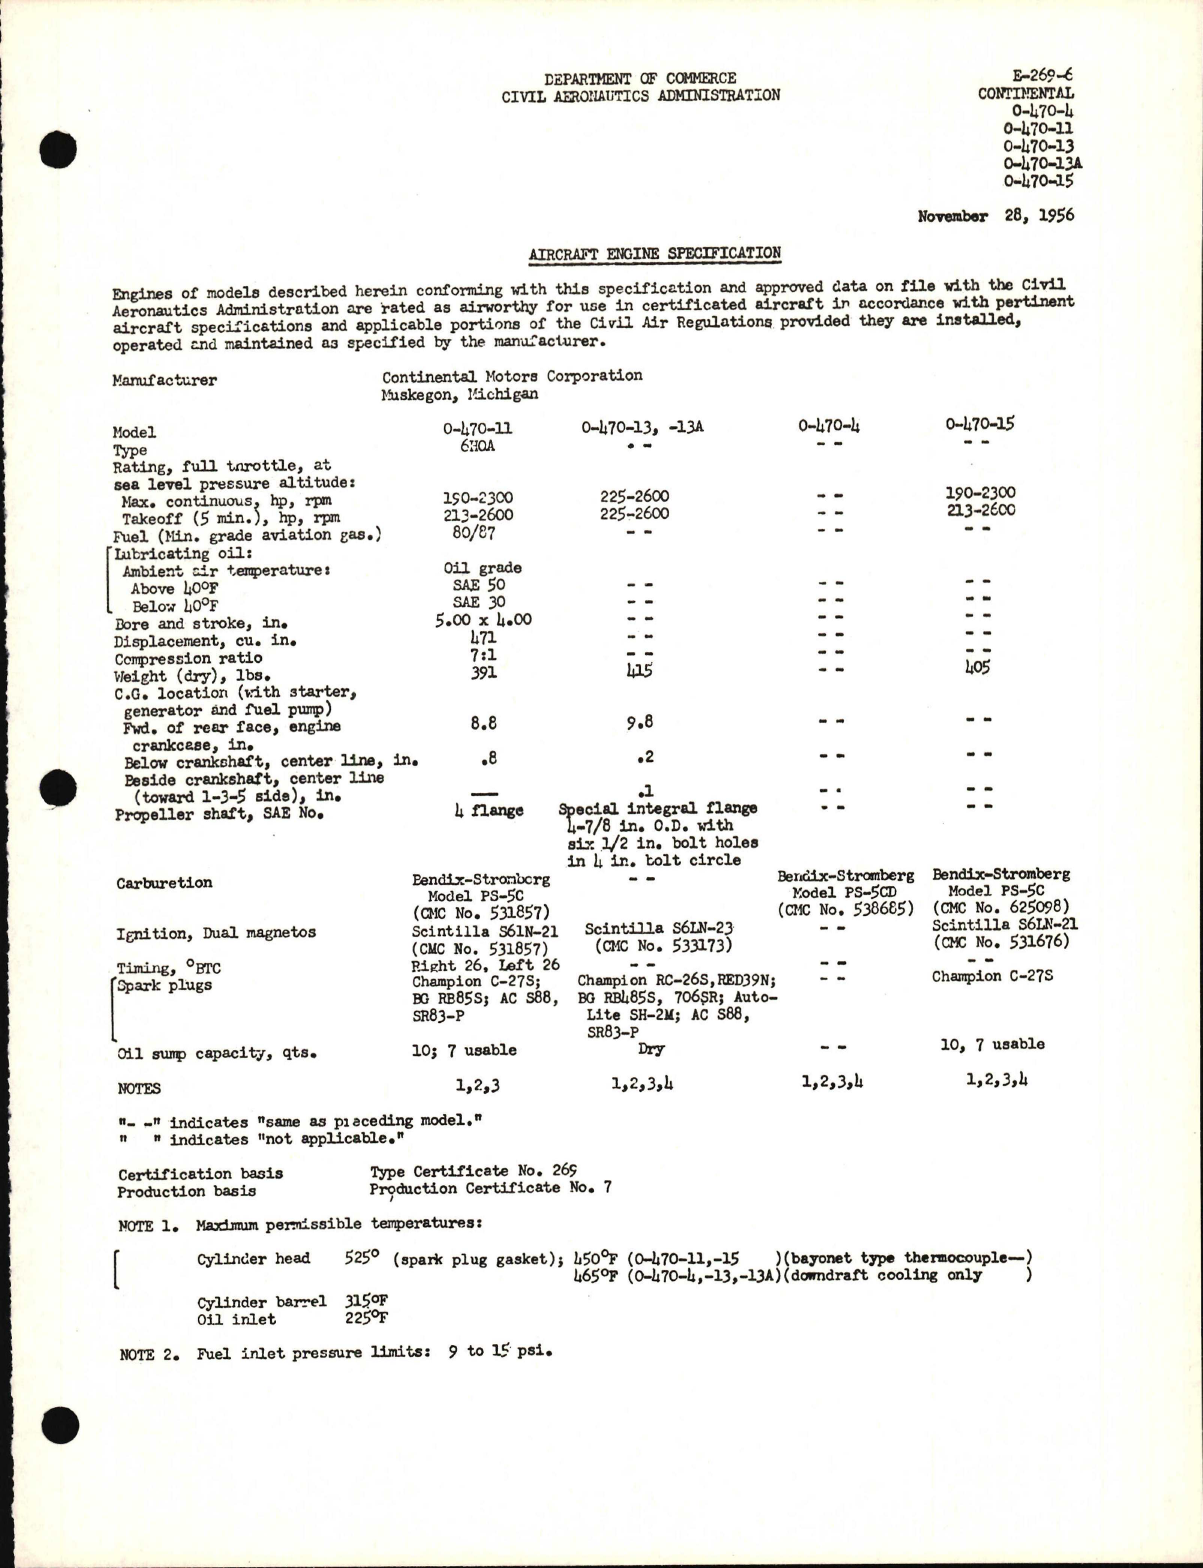 Sample page 1 from AirCorps Library document: O-470-4, -11, -13, -13A, and -15